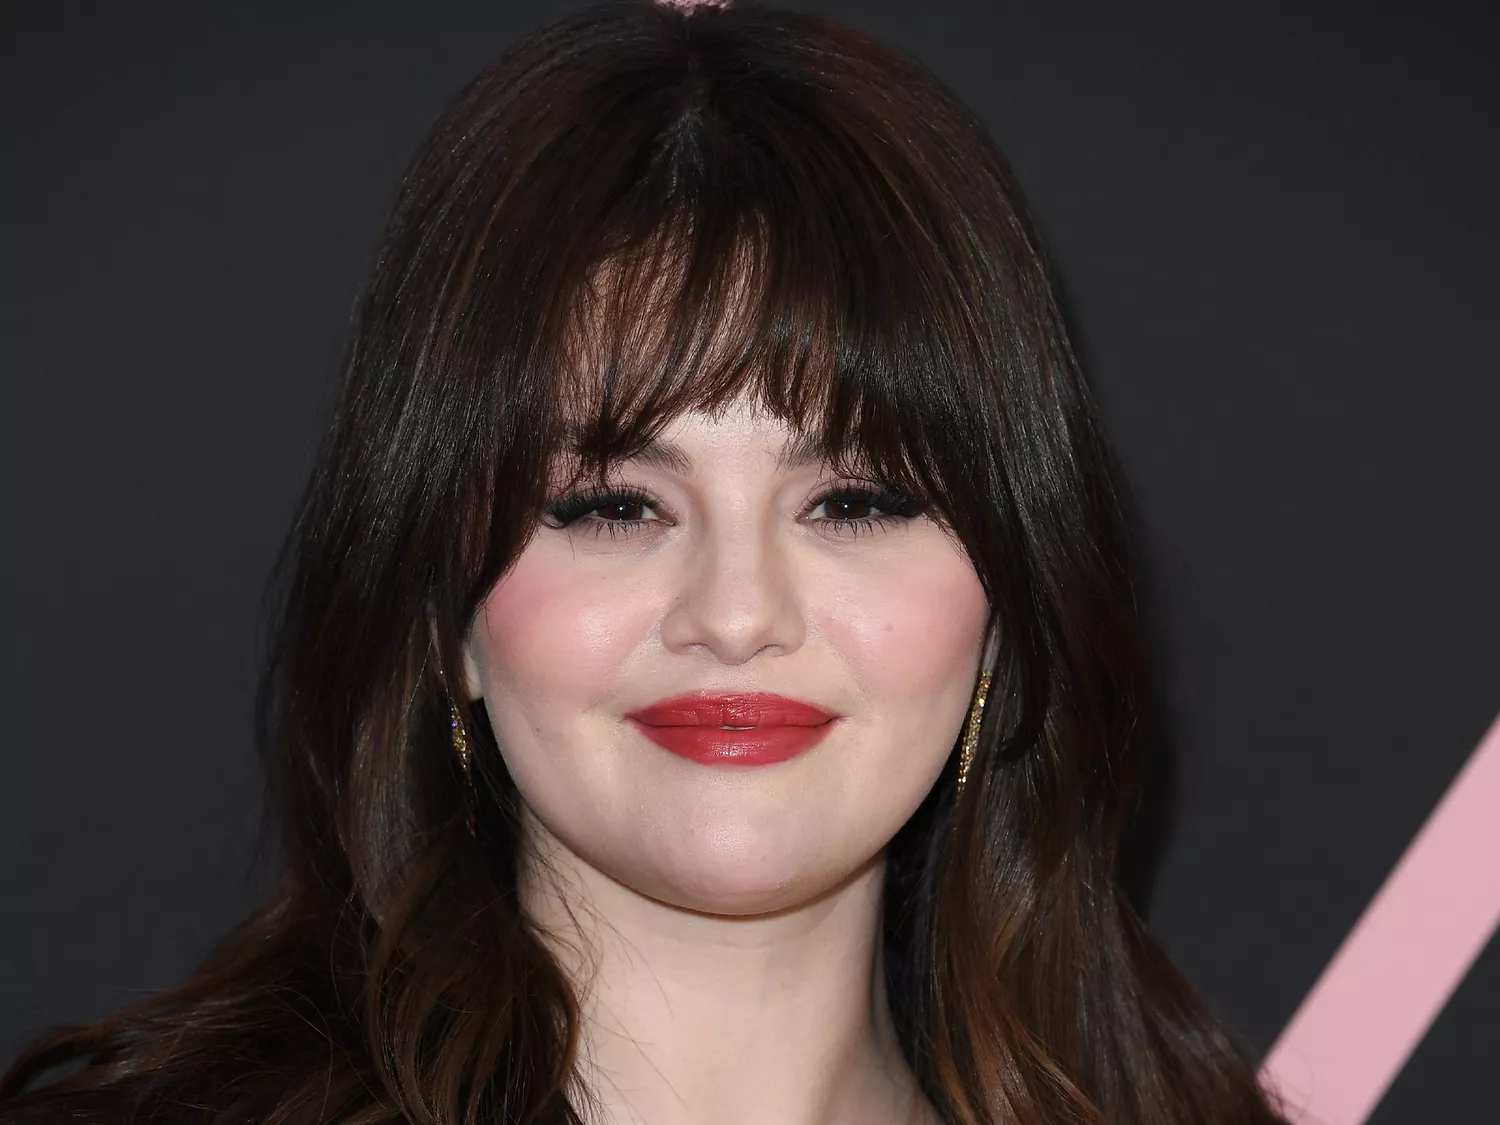 Selena Gomez wearing red lipstick and bangs